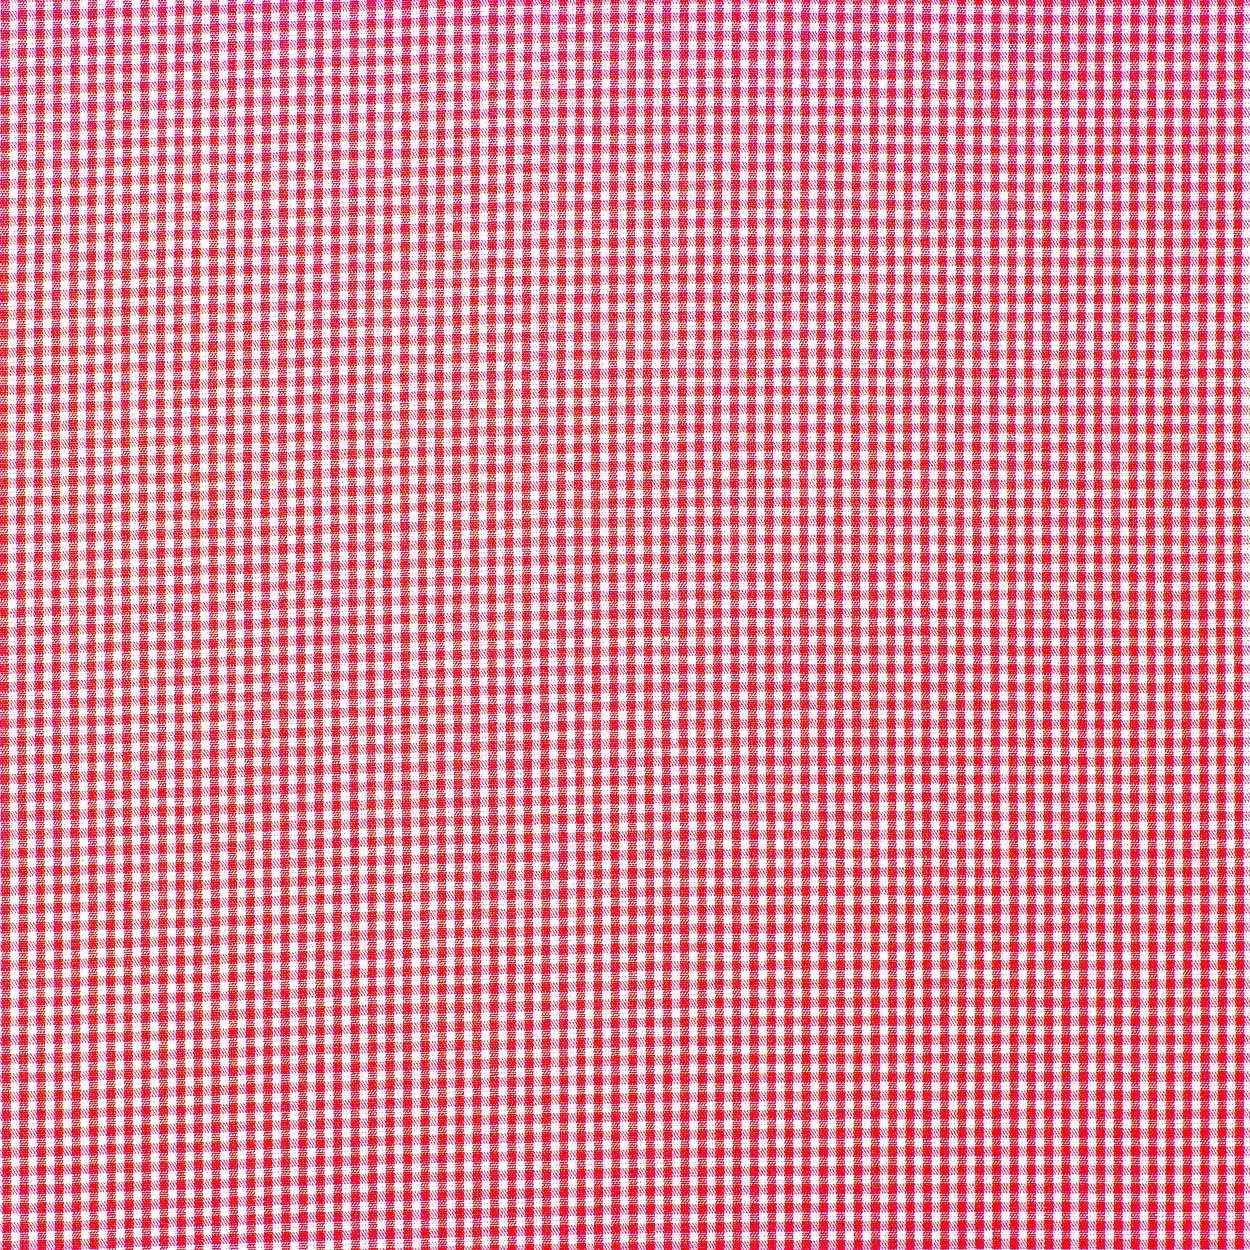 Tiny Check 1mm - red